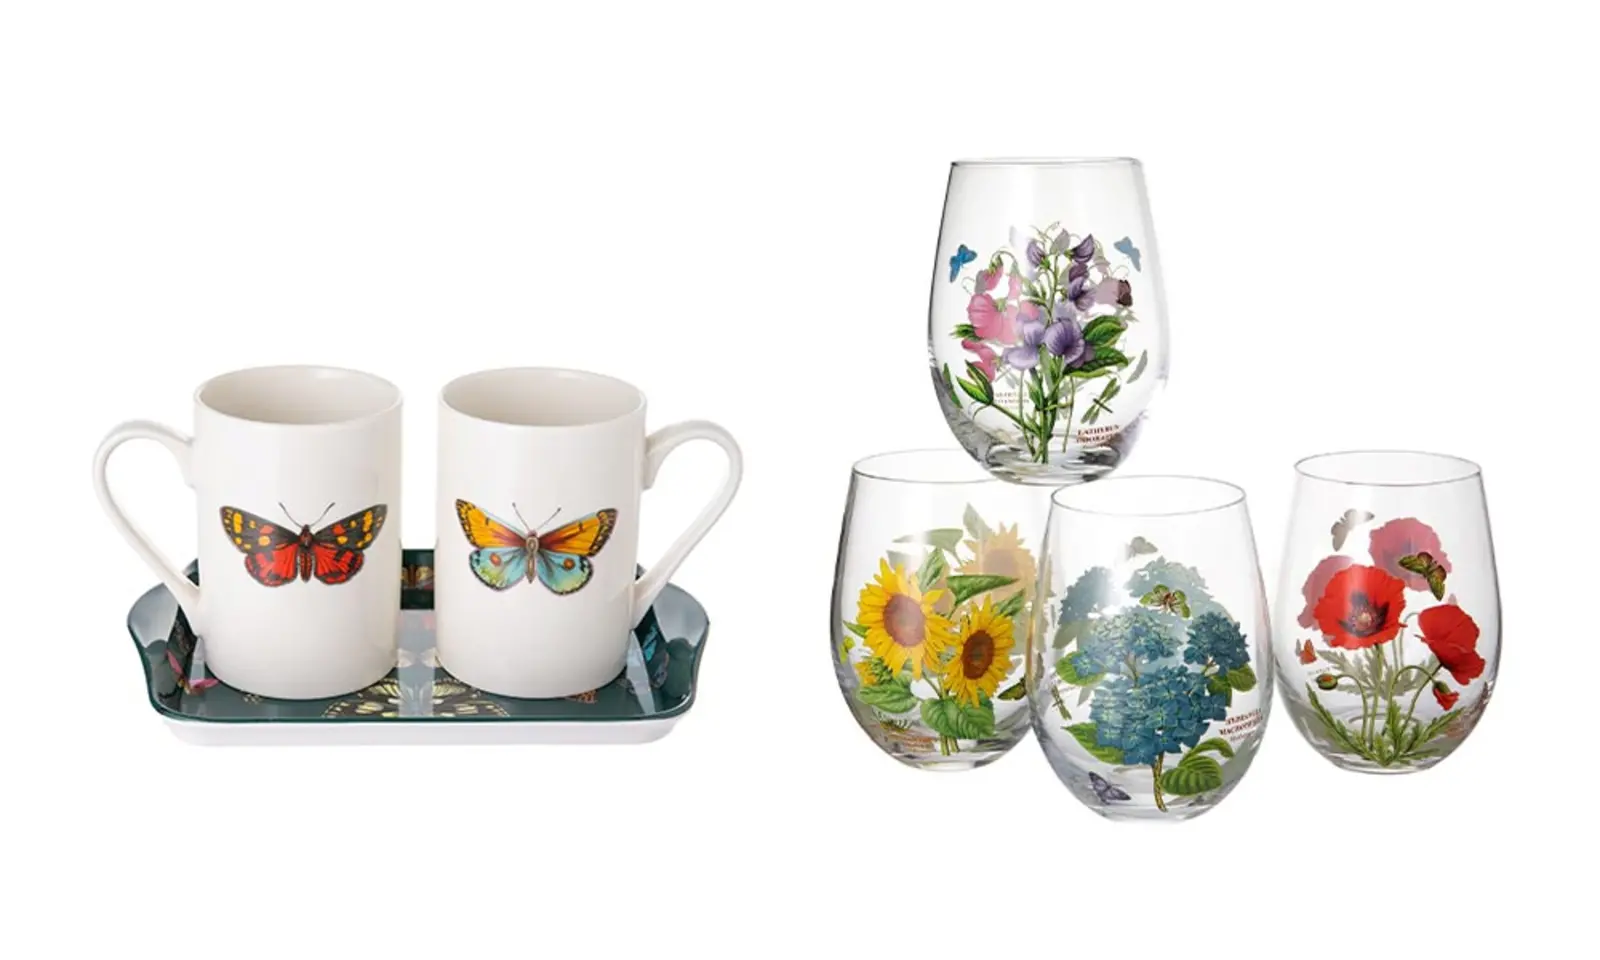 Two sets of drinking mugs and wine glasses with botanical motifs.